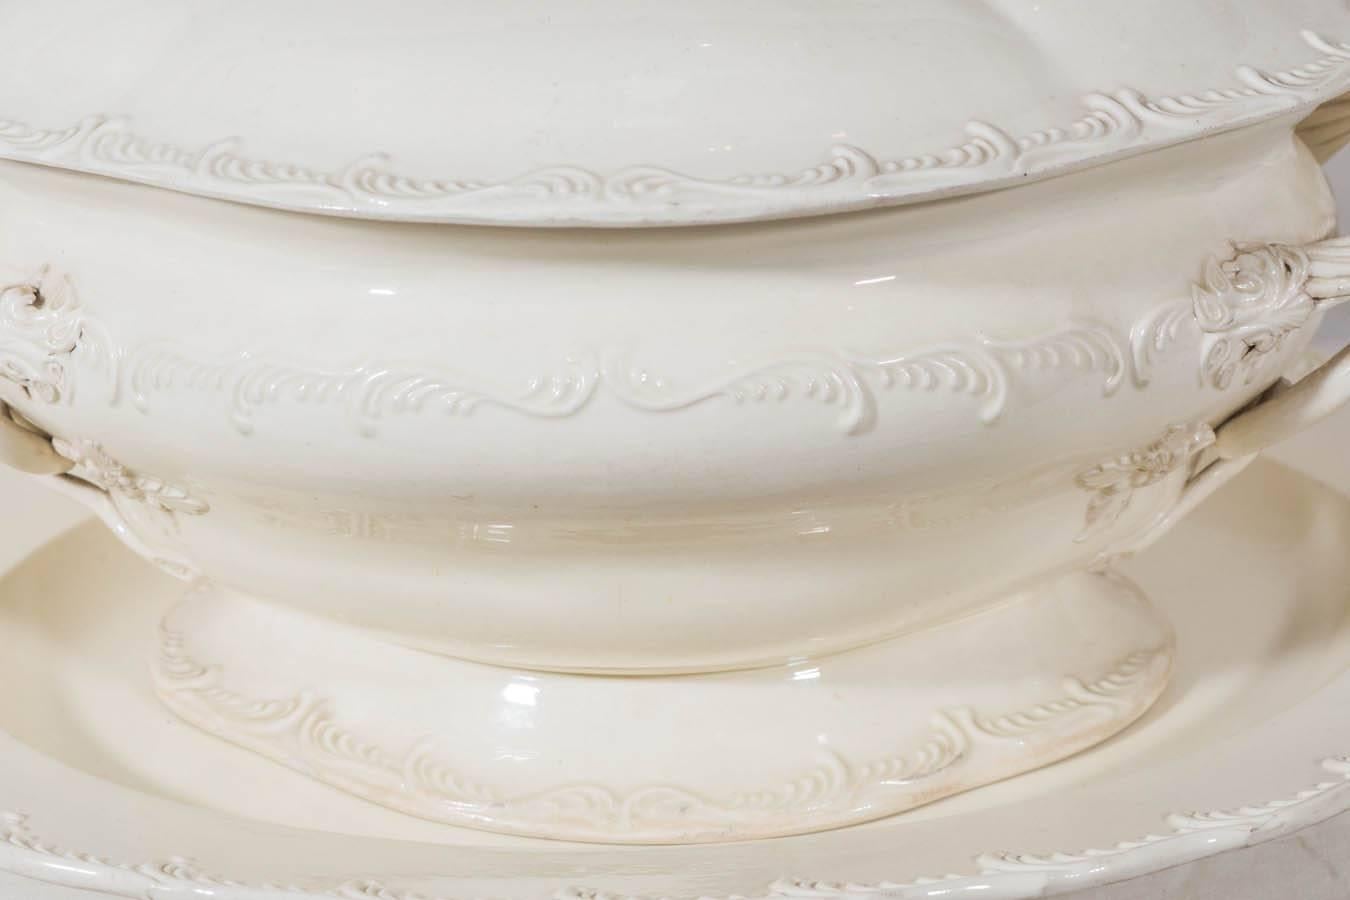 An exceptional 18th century creamware soup tureen and stand perfectly proportioned. Beautifully decorated with an outstanding pomegranate finial, intertwined rope handles, and crisply molded feather edge border, this tureen is one of the finest we